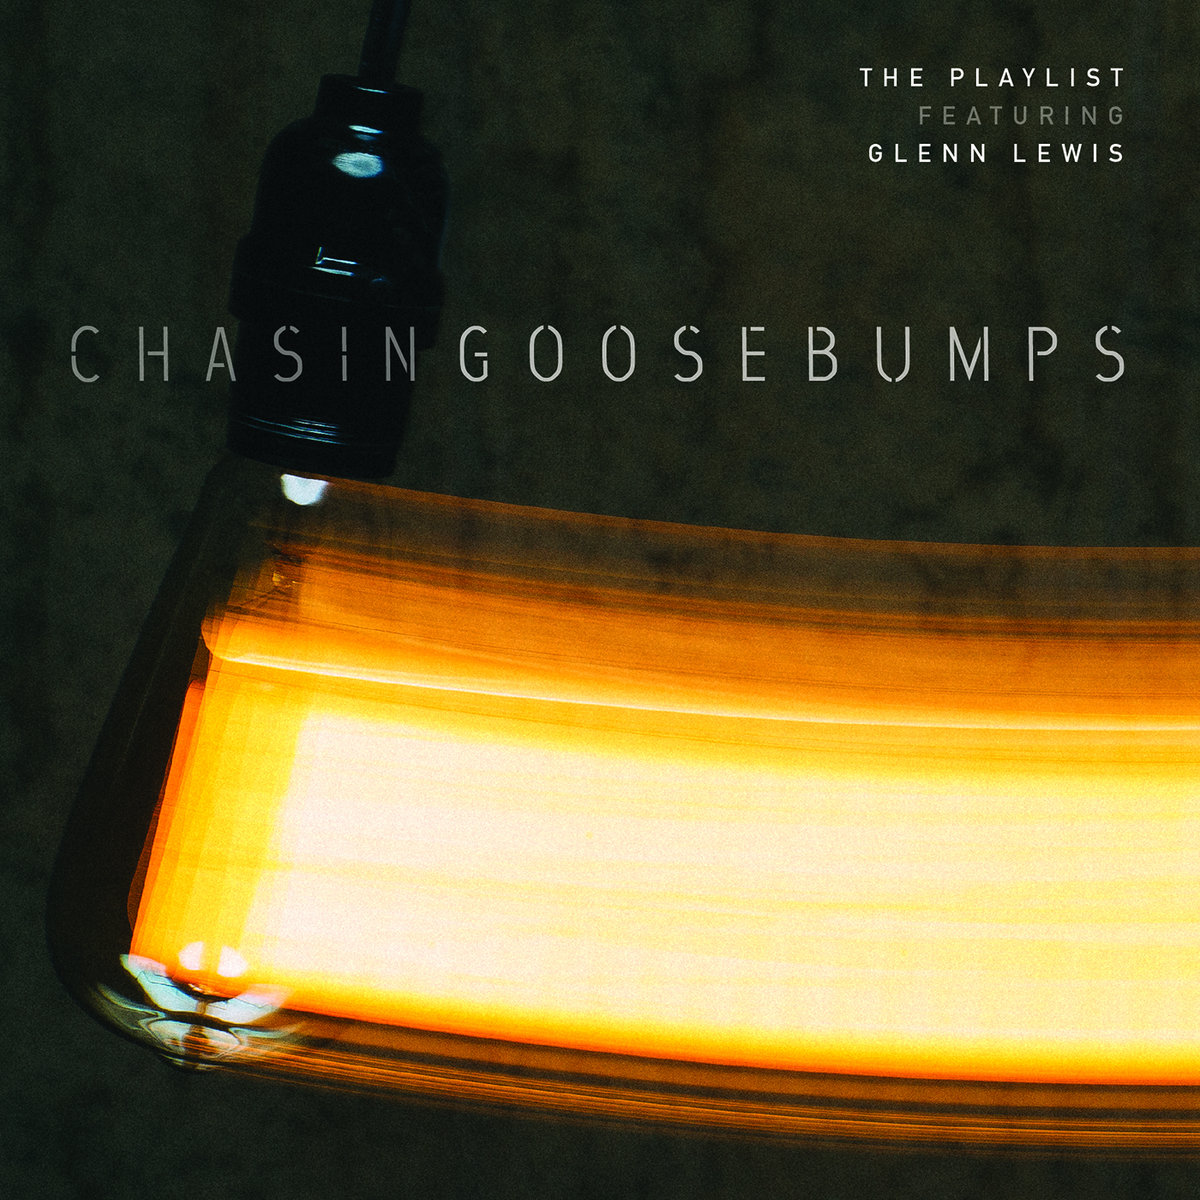 The Playlist featuring Glenn Lewis – Chasing Goosebumps